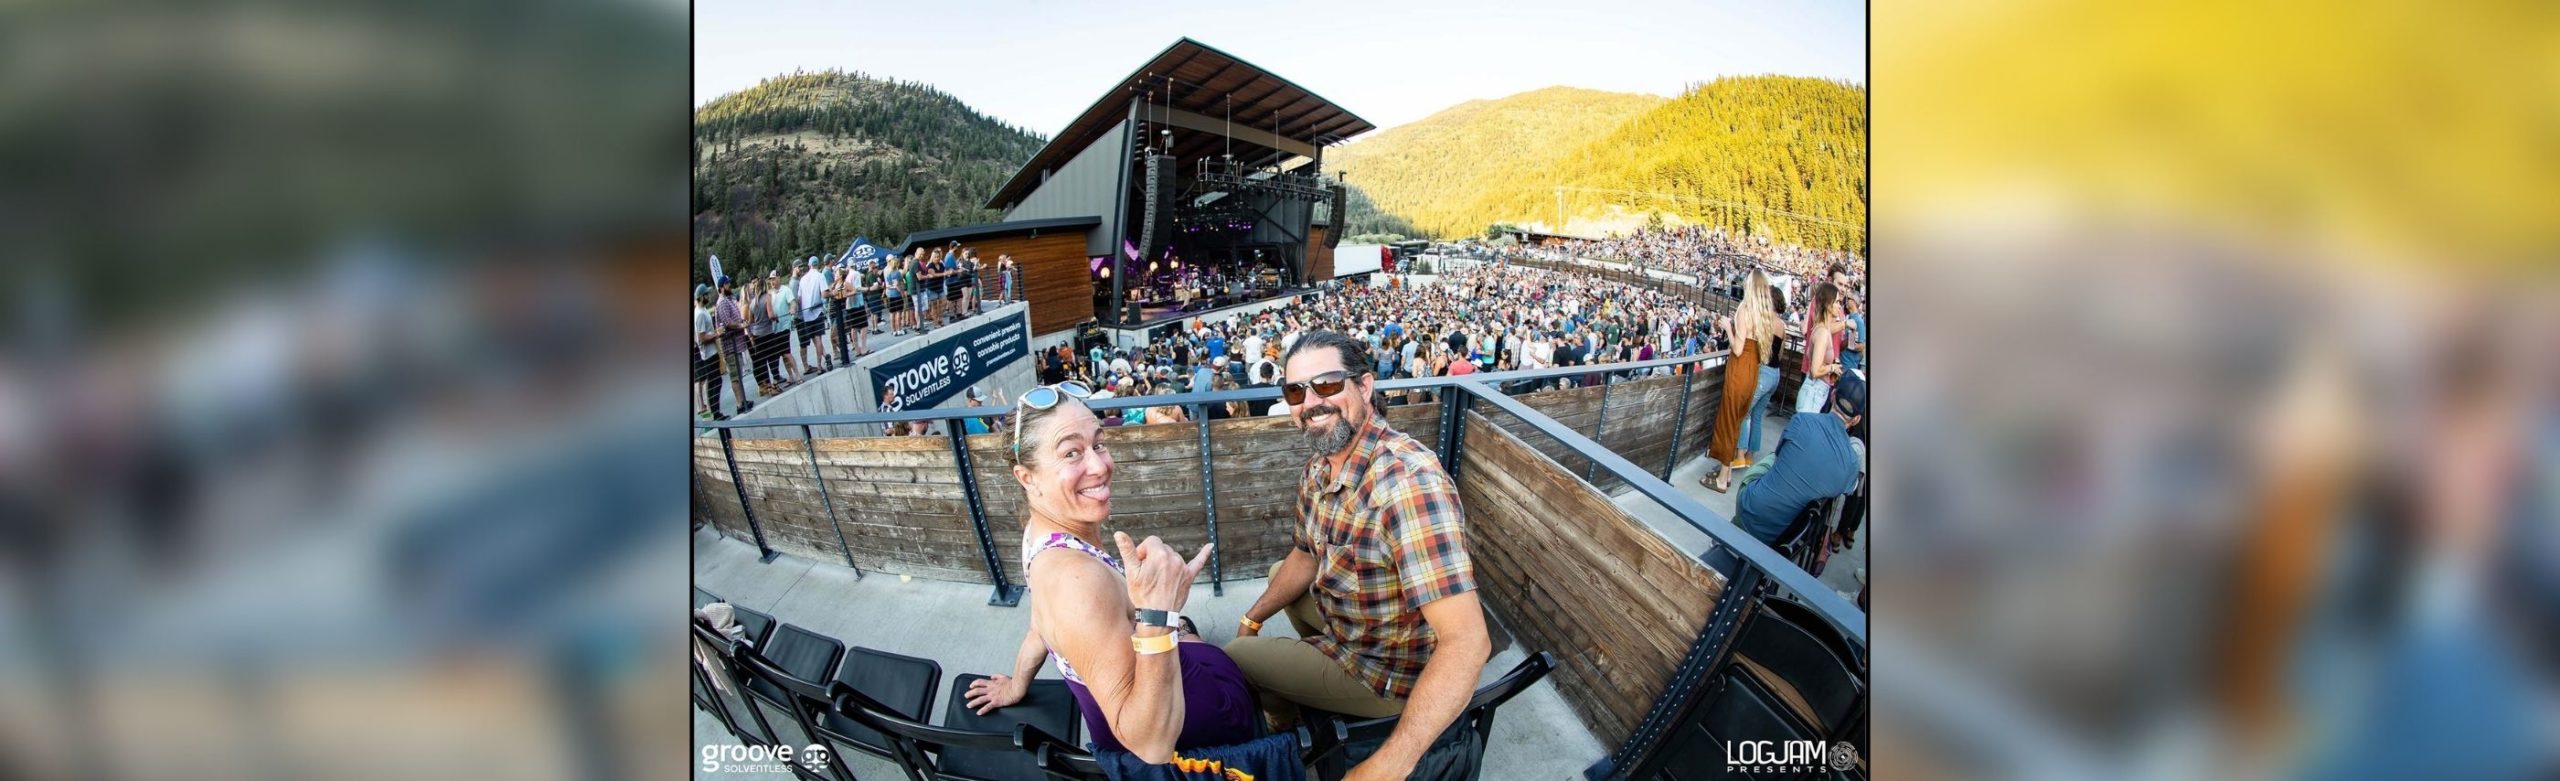 Premium Box Seats Released for Umphrey’s McGee at KettleHouse Amphitheater Image